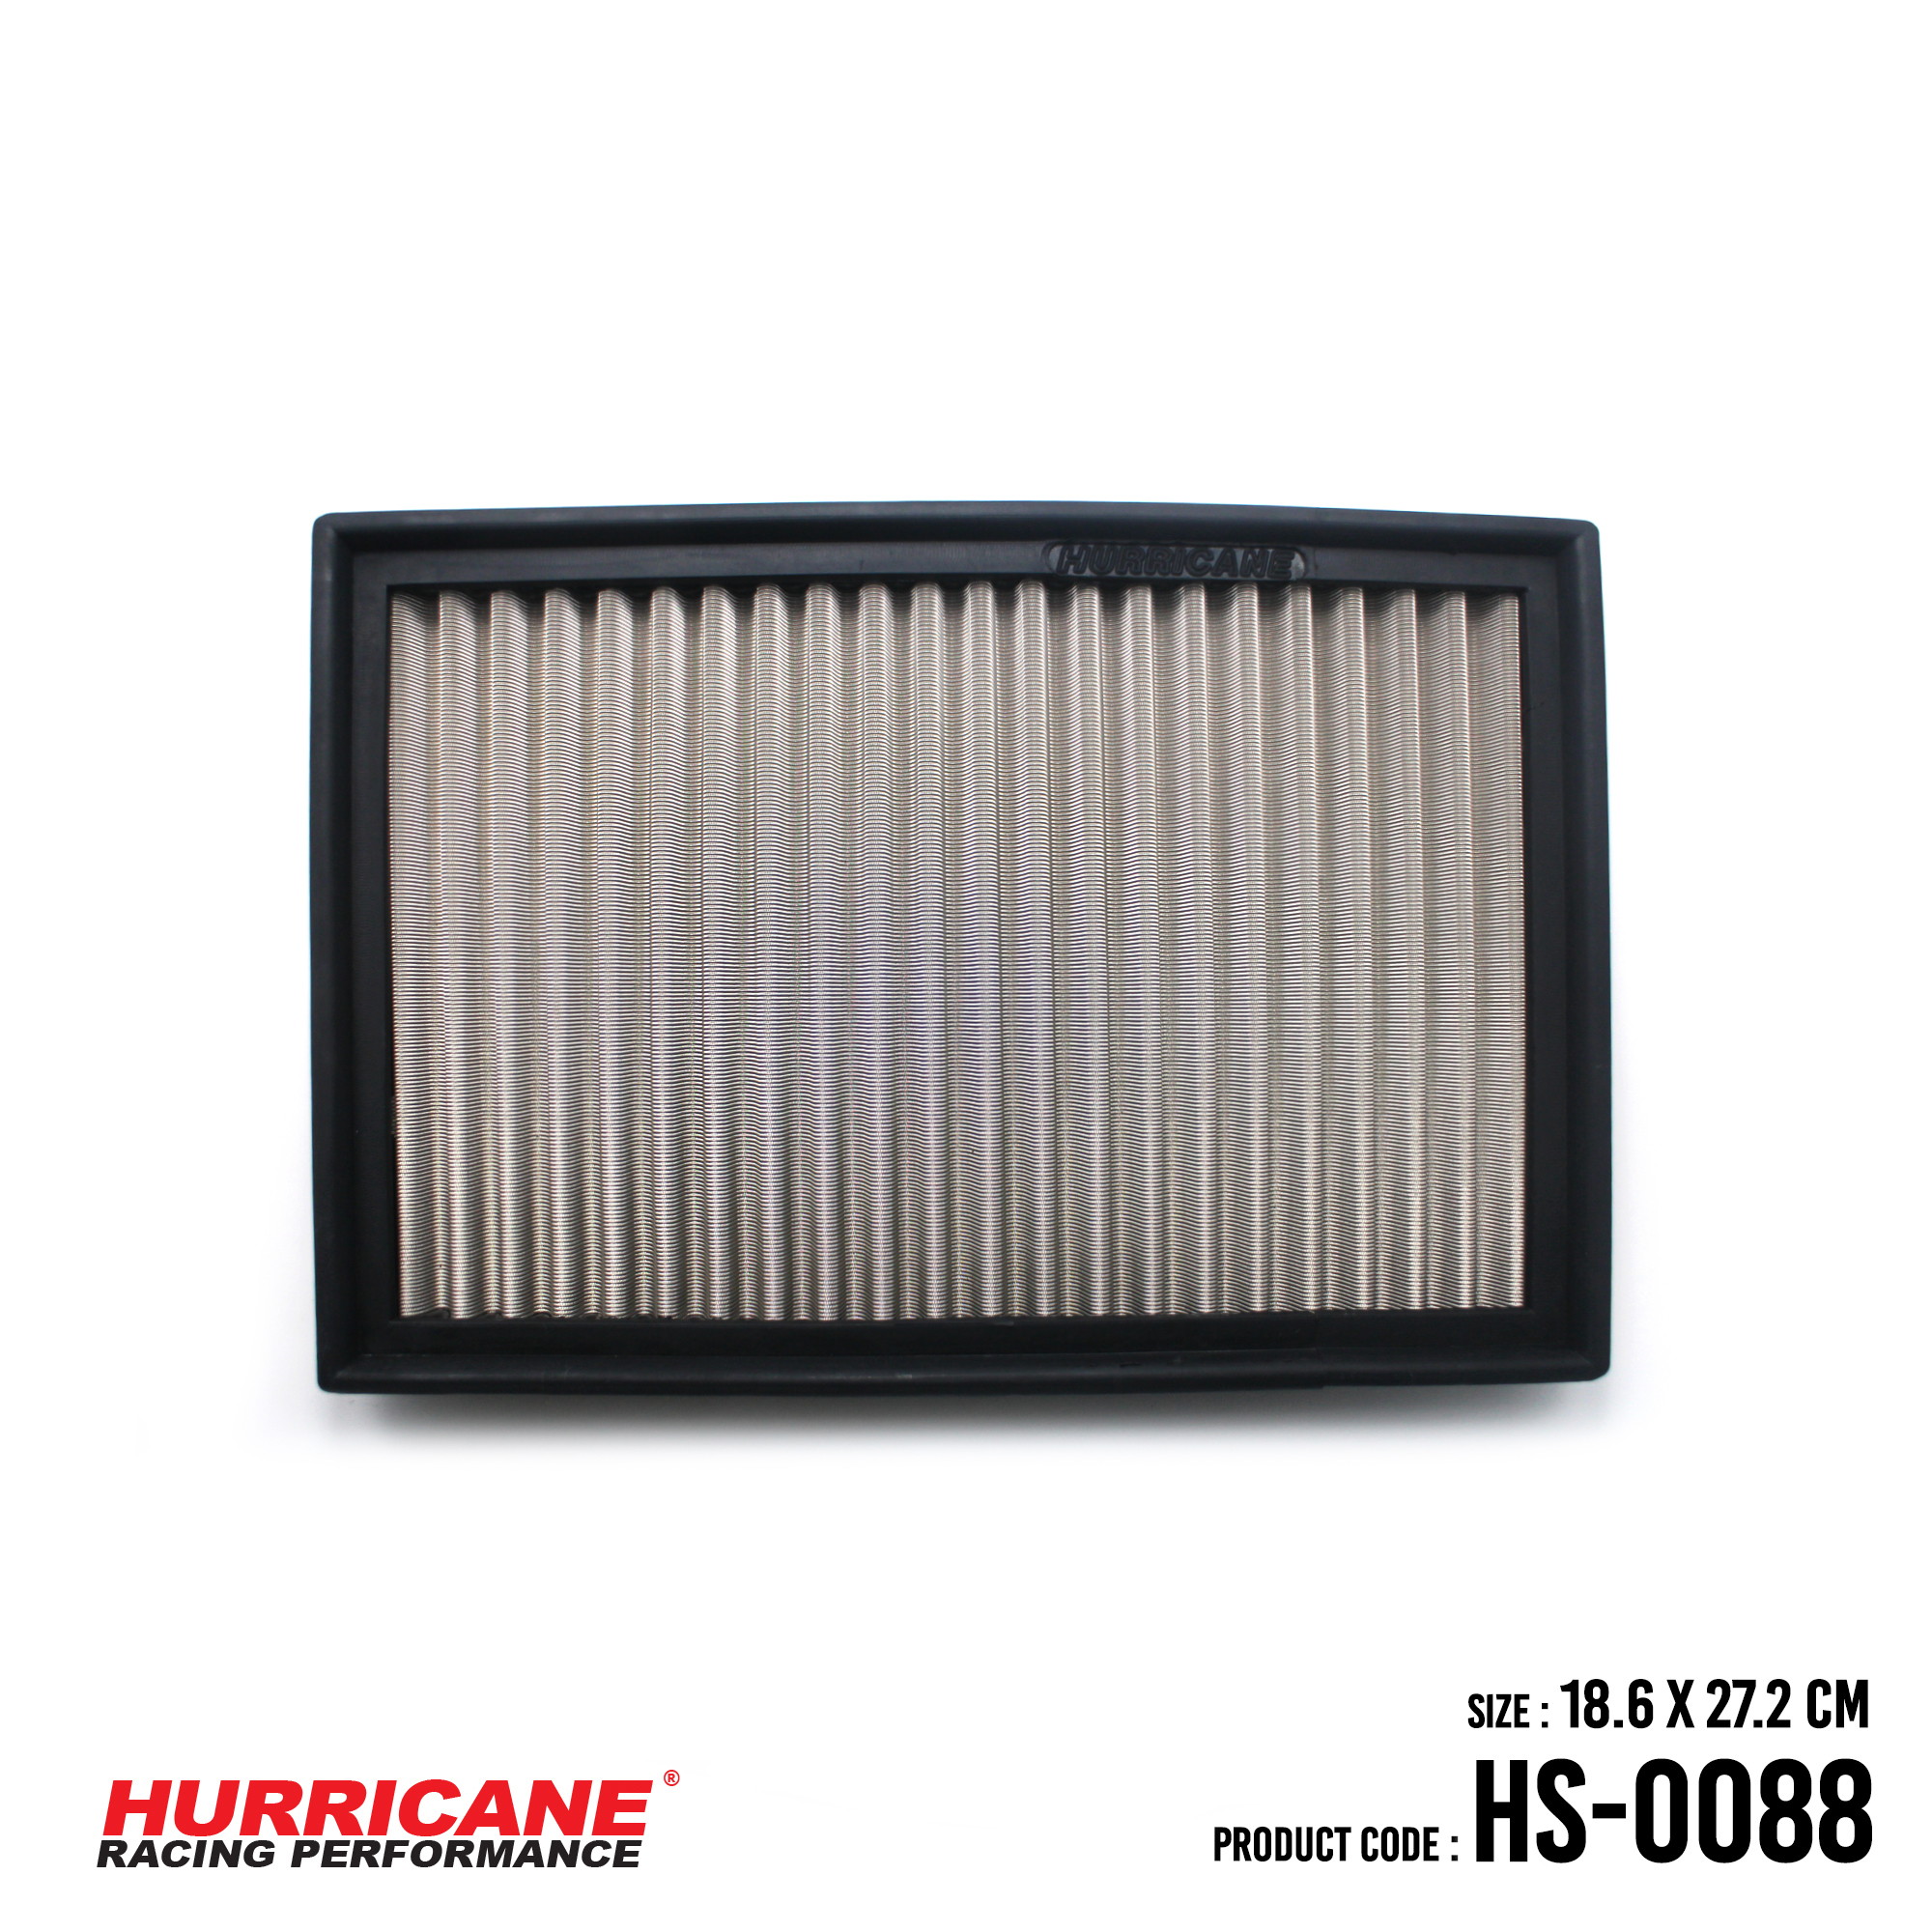 HURRICANE STAINLESS STEEL AIR FILTER FOR HS-0088 Mazda